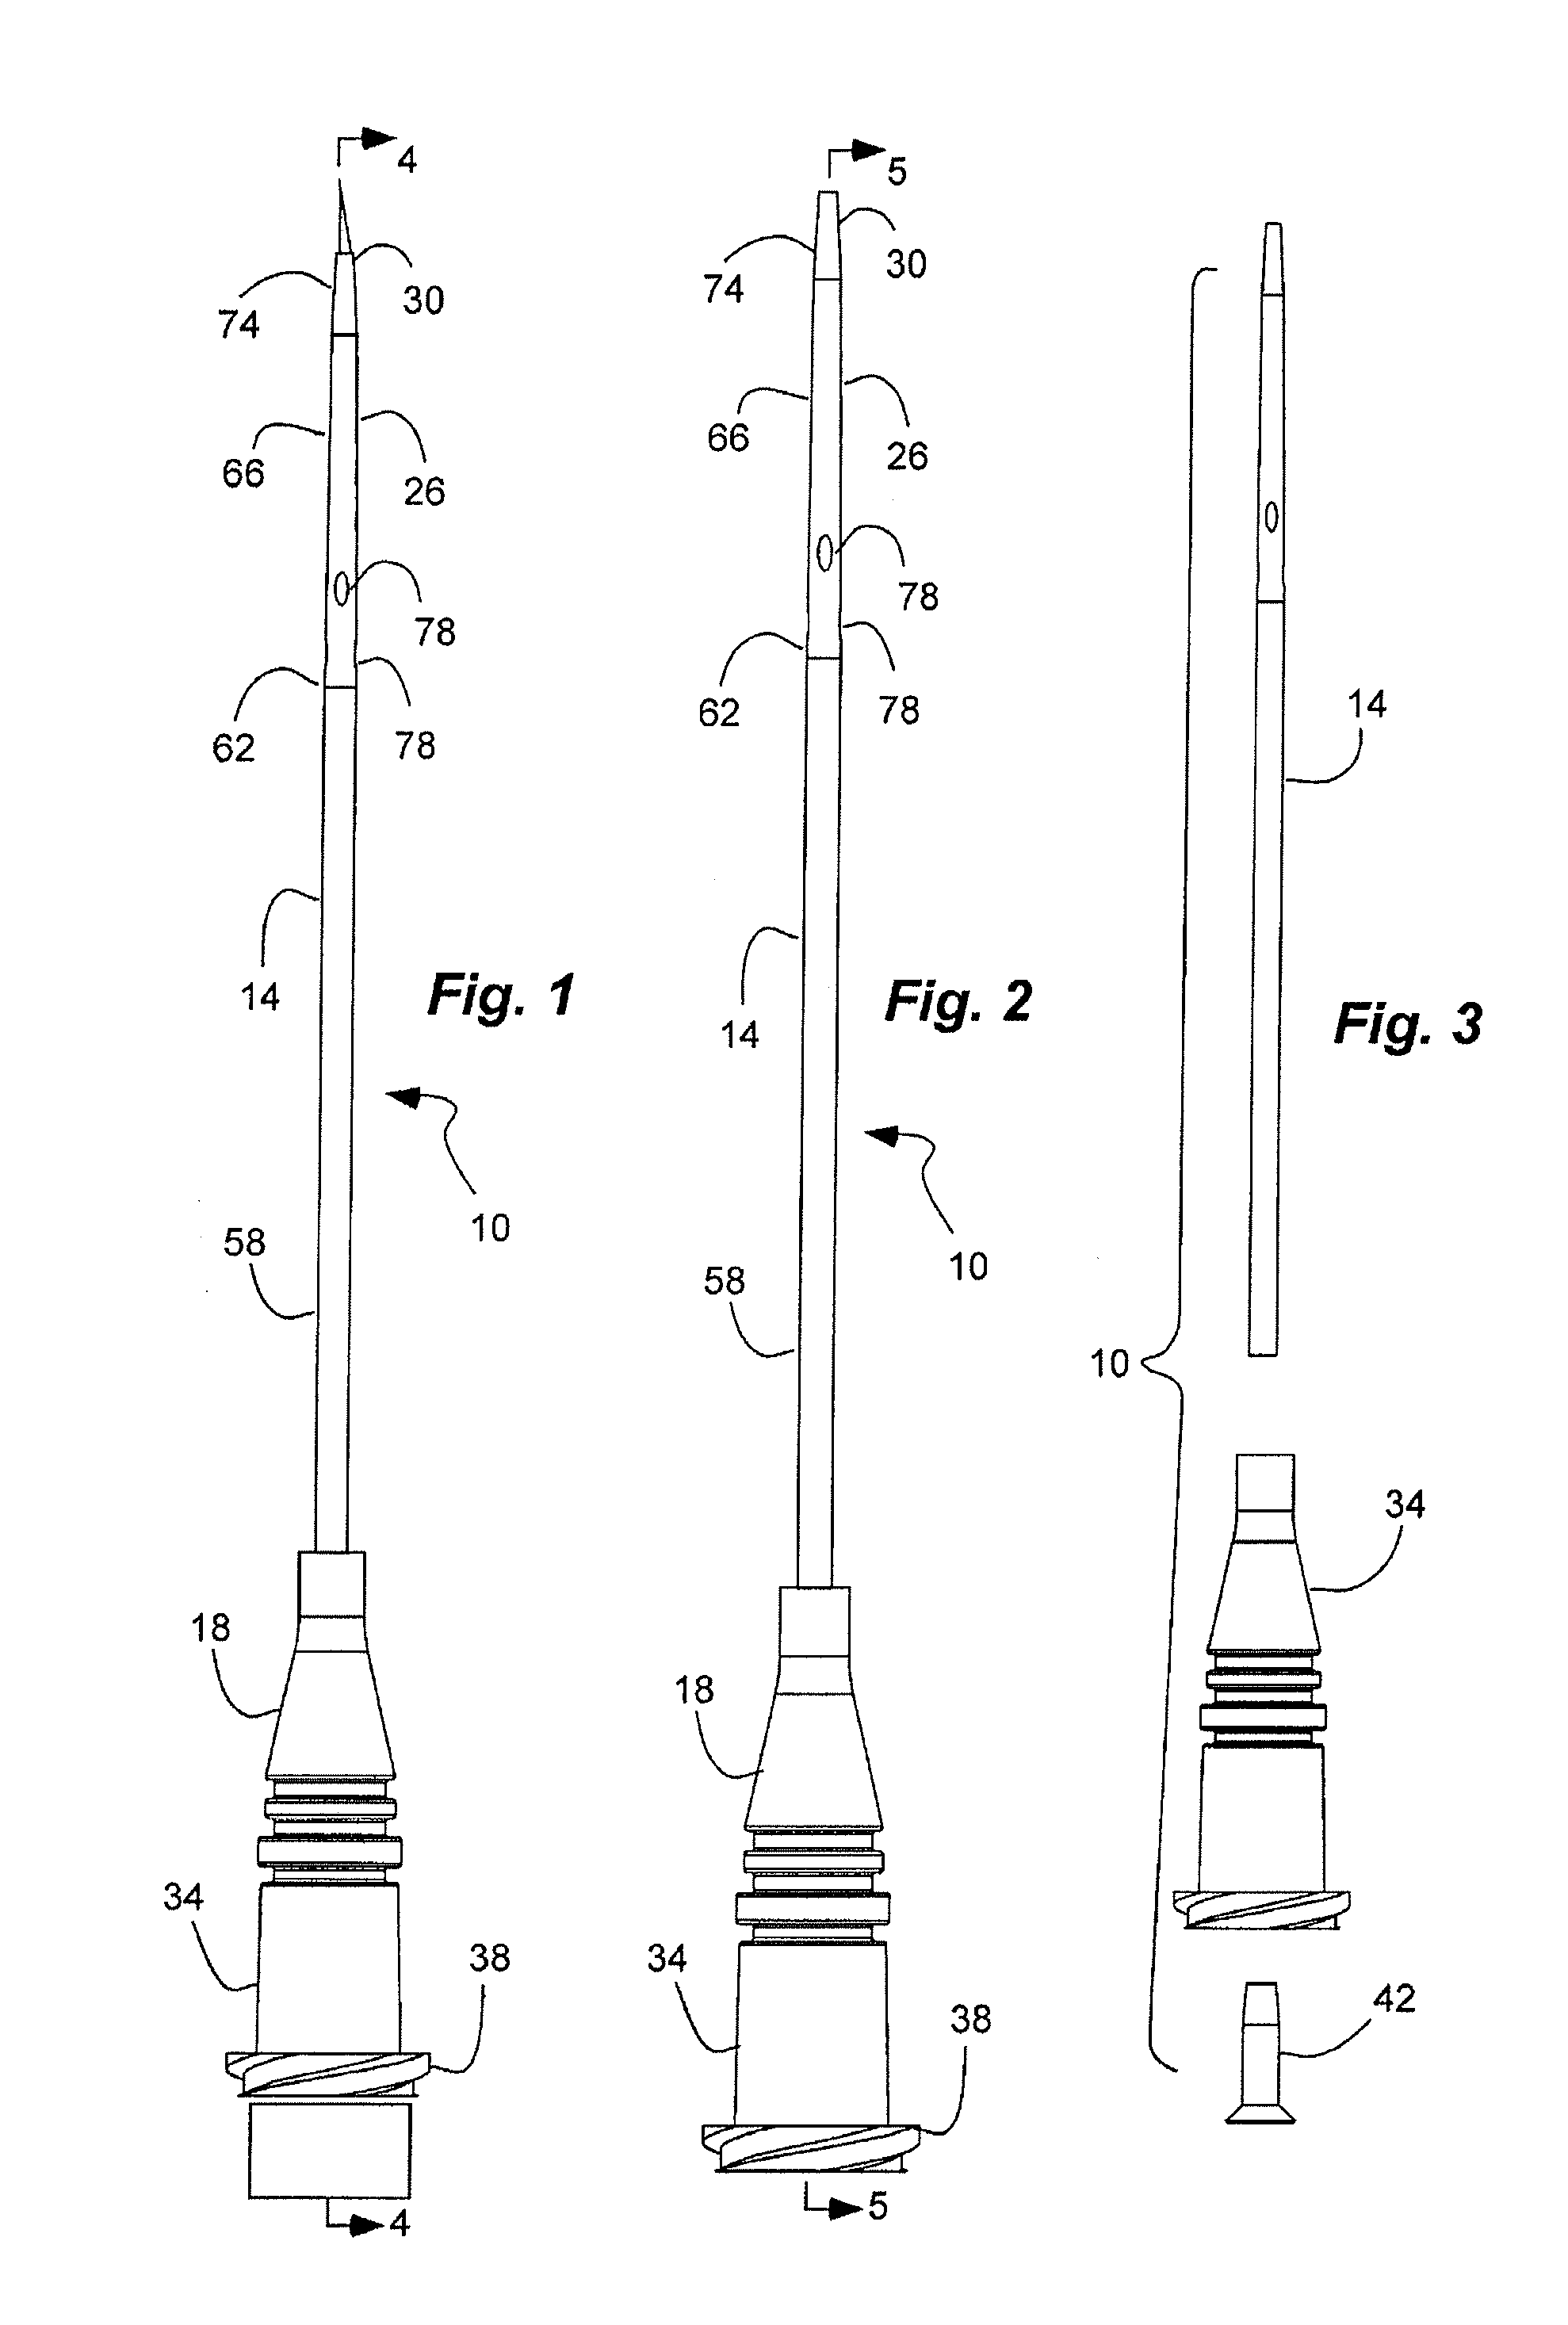 High-flow tapered peripheral IV catheter with side outlets